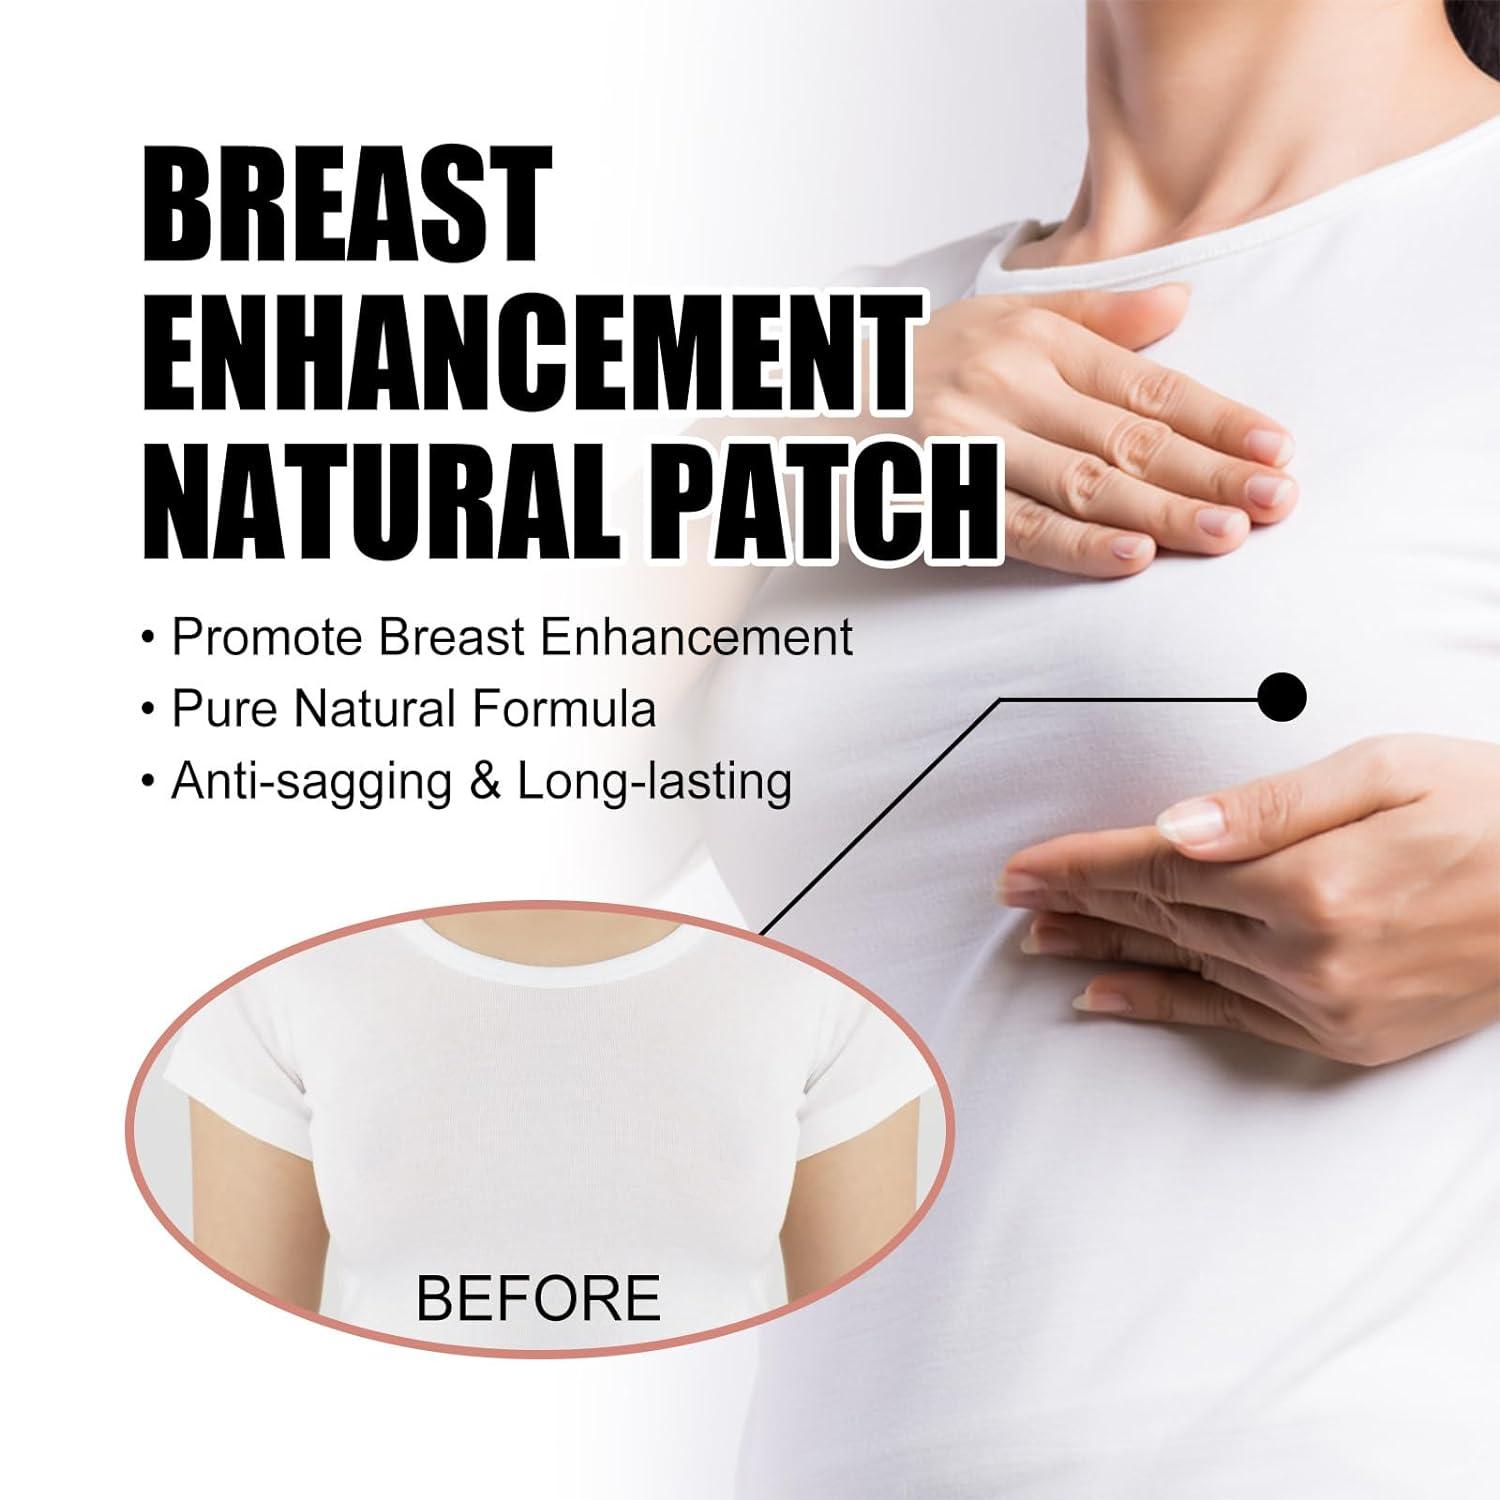 Breast Enhancement Patch, Breast Enhancement Mask, Nutroup Ginger Bust  Enhancement Patch, Breast Growth Patches, Natural Breast Nourishing Firming